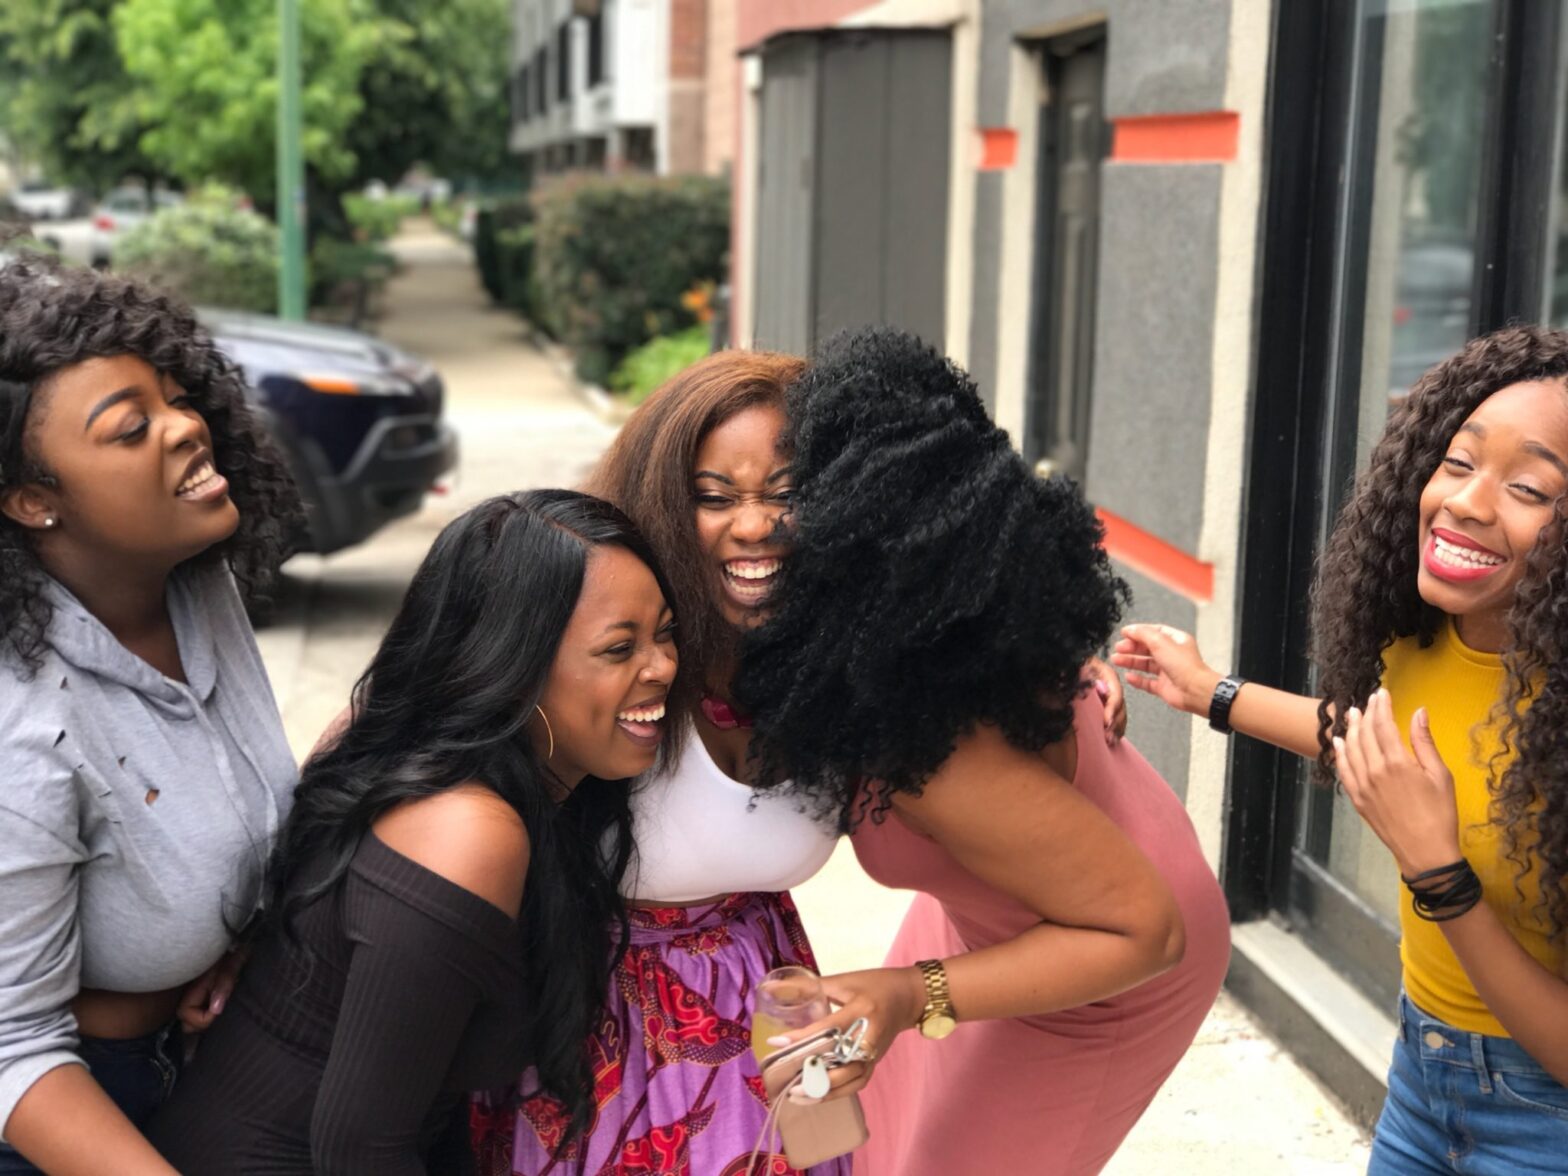 What does it mean to have a ride or die in your life? Find out all the traits and see who that extra special someone is in your life. Pictured: 4 black girls laughing and sharing a joke together on the street.